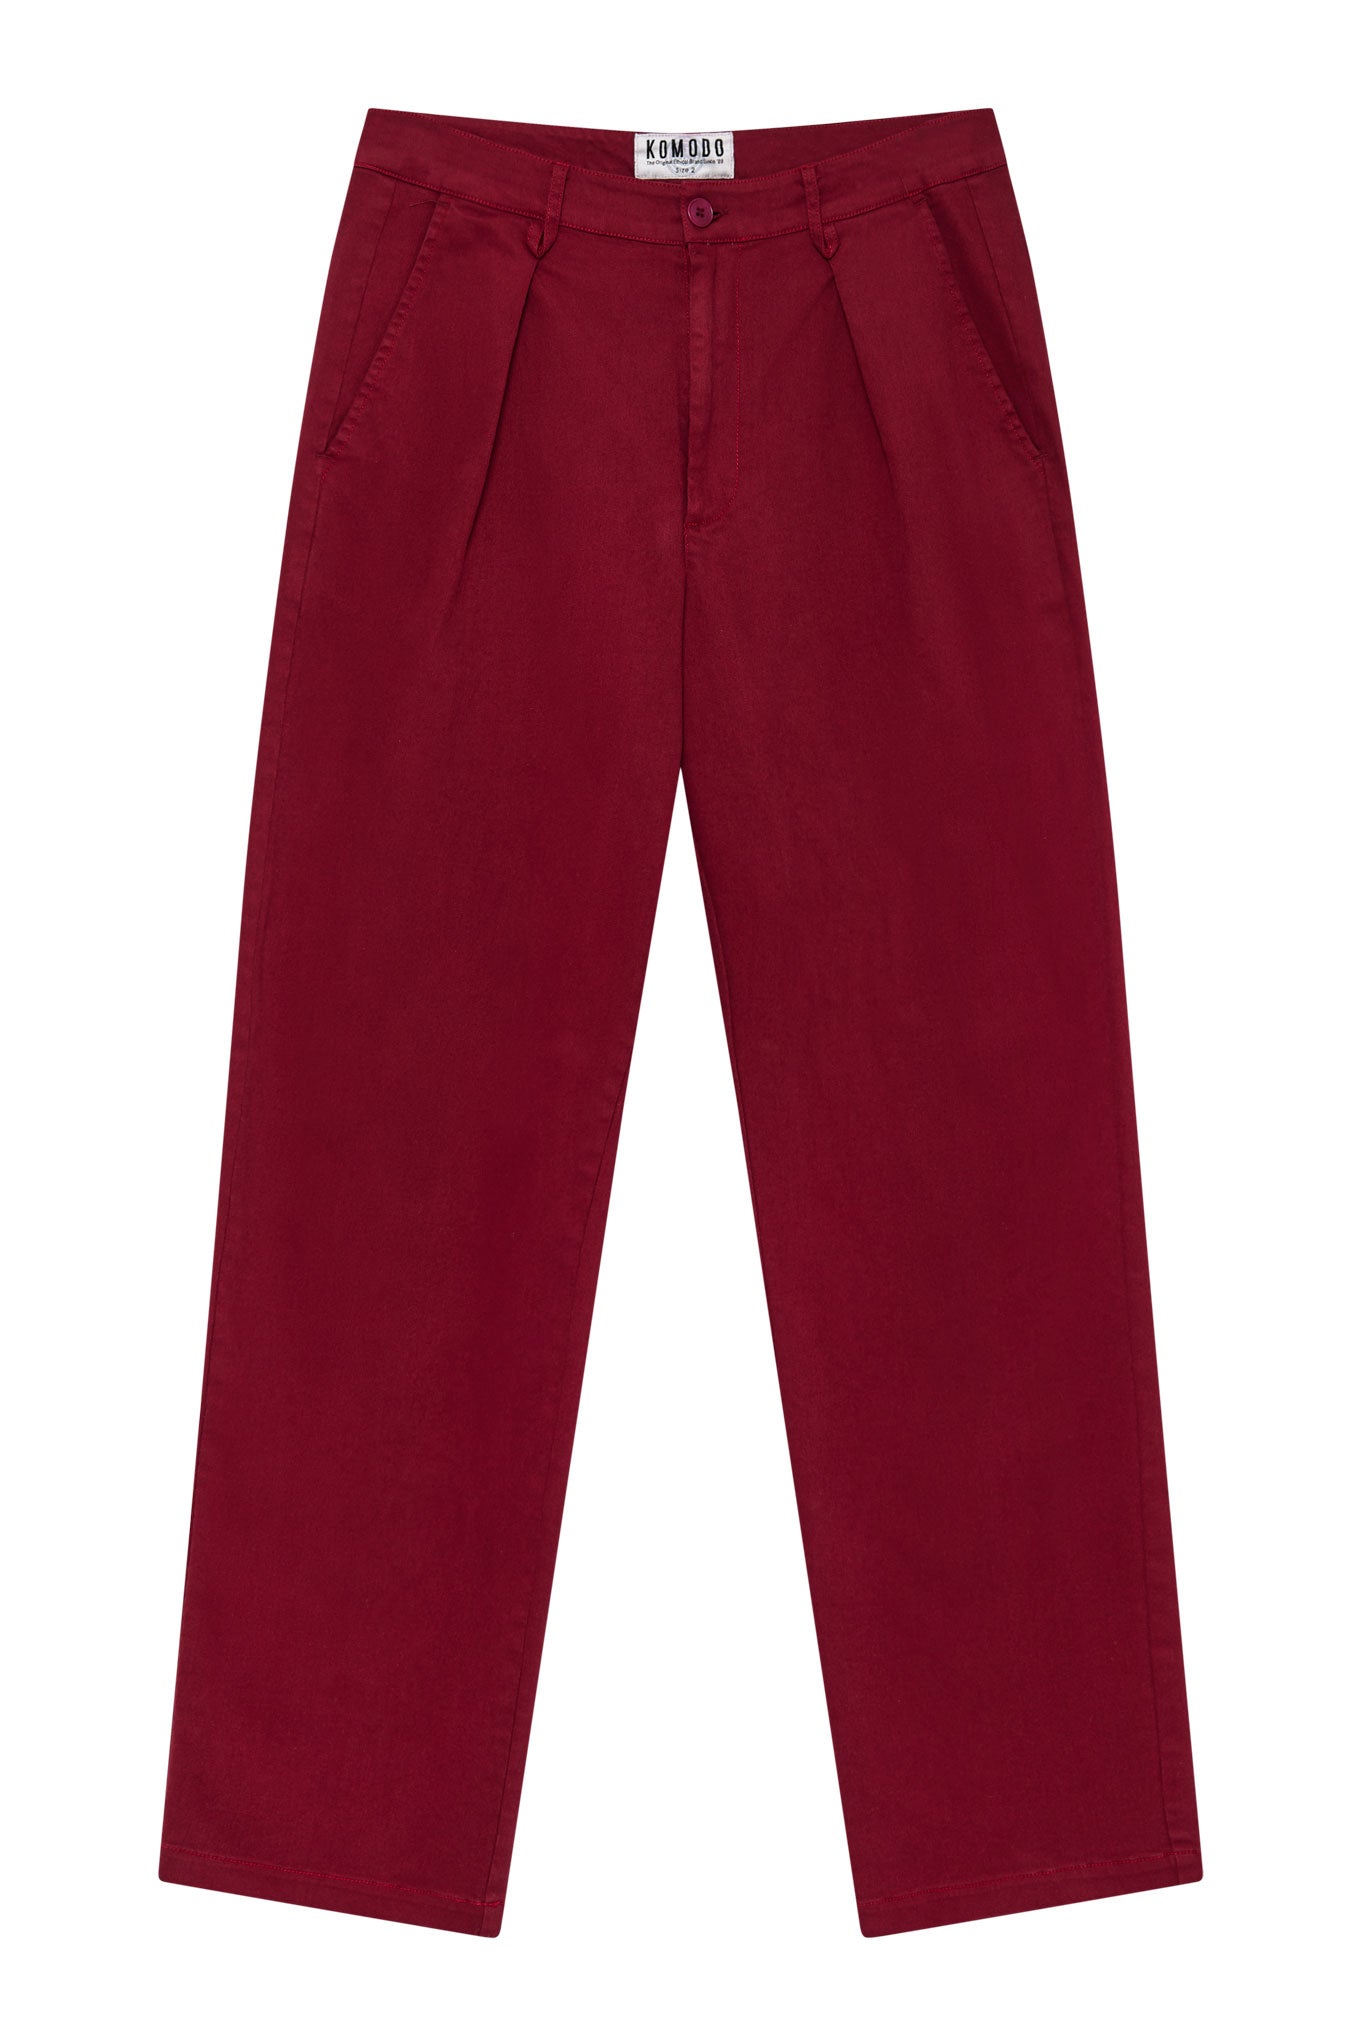 Dark red, loose BOWIE trousers made of organic cotton by Komodo